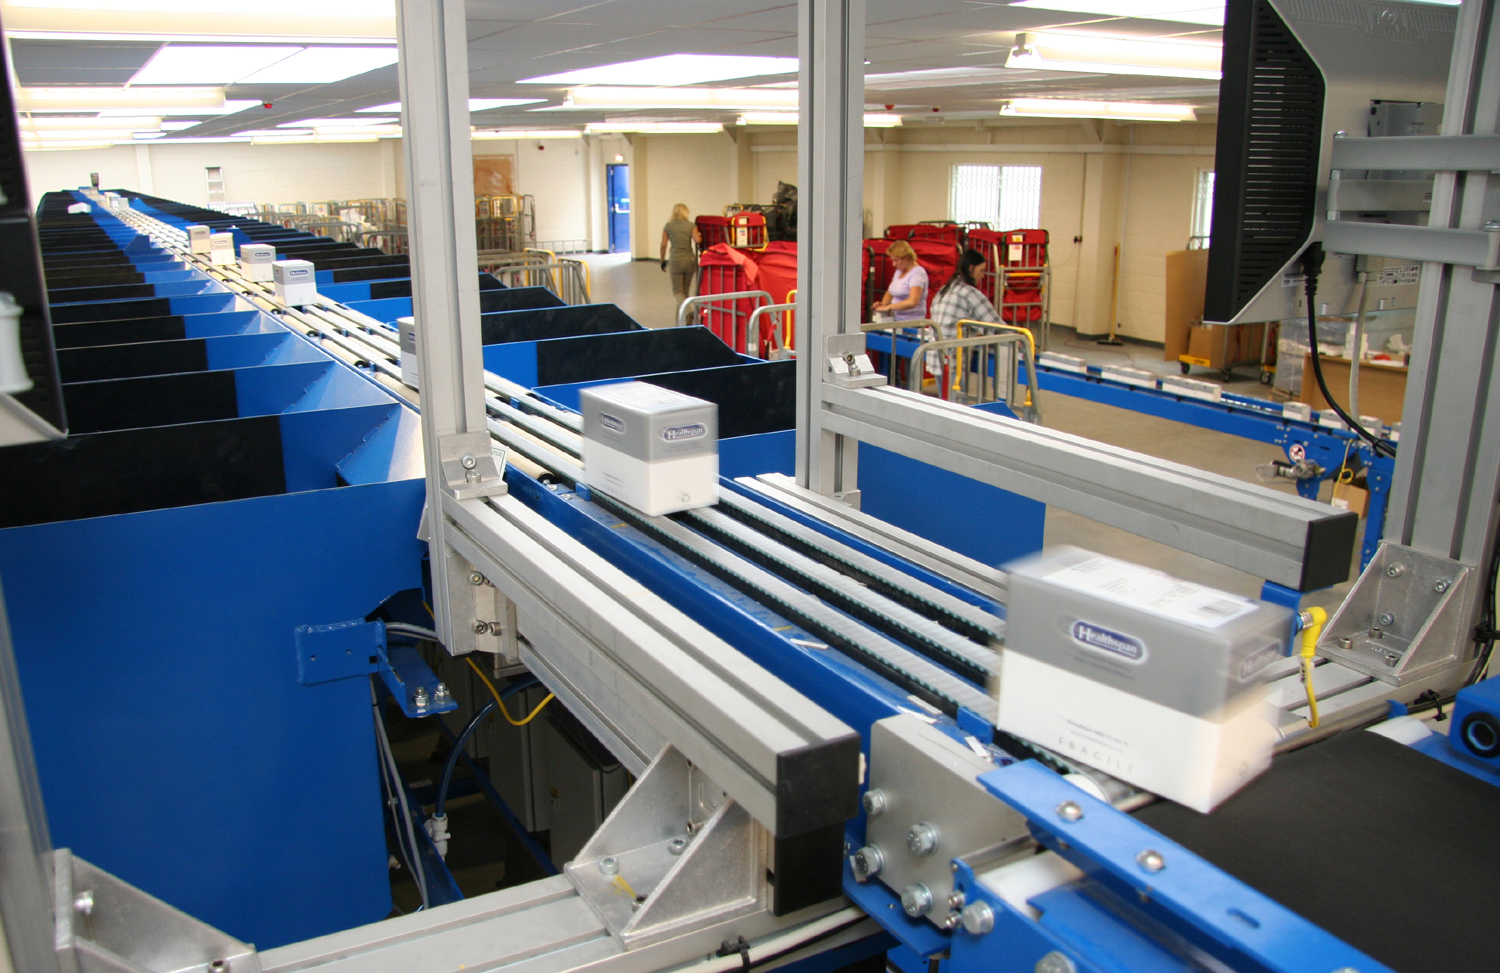 Axiom GB Ltd is the only UK designer & manufacturer of sortation systems. A PUR (pop-up roller) sorter is especially good for smaller regular boxed shaped packages. Let’s talk…. We’d love to help you solve your materials handling challenges. www.axiomgb.com sales@axiomgb.com +44(0)1827 61212